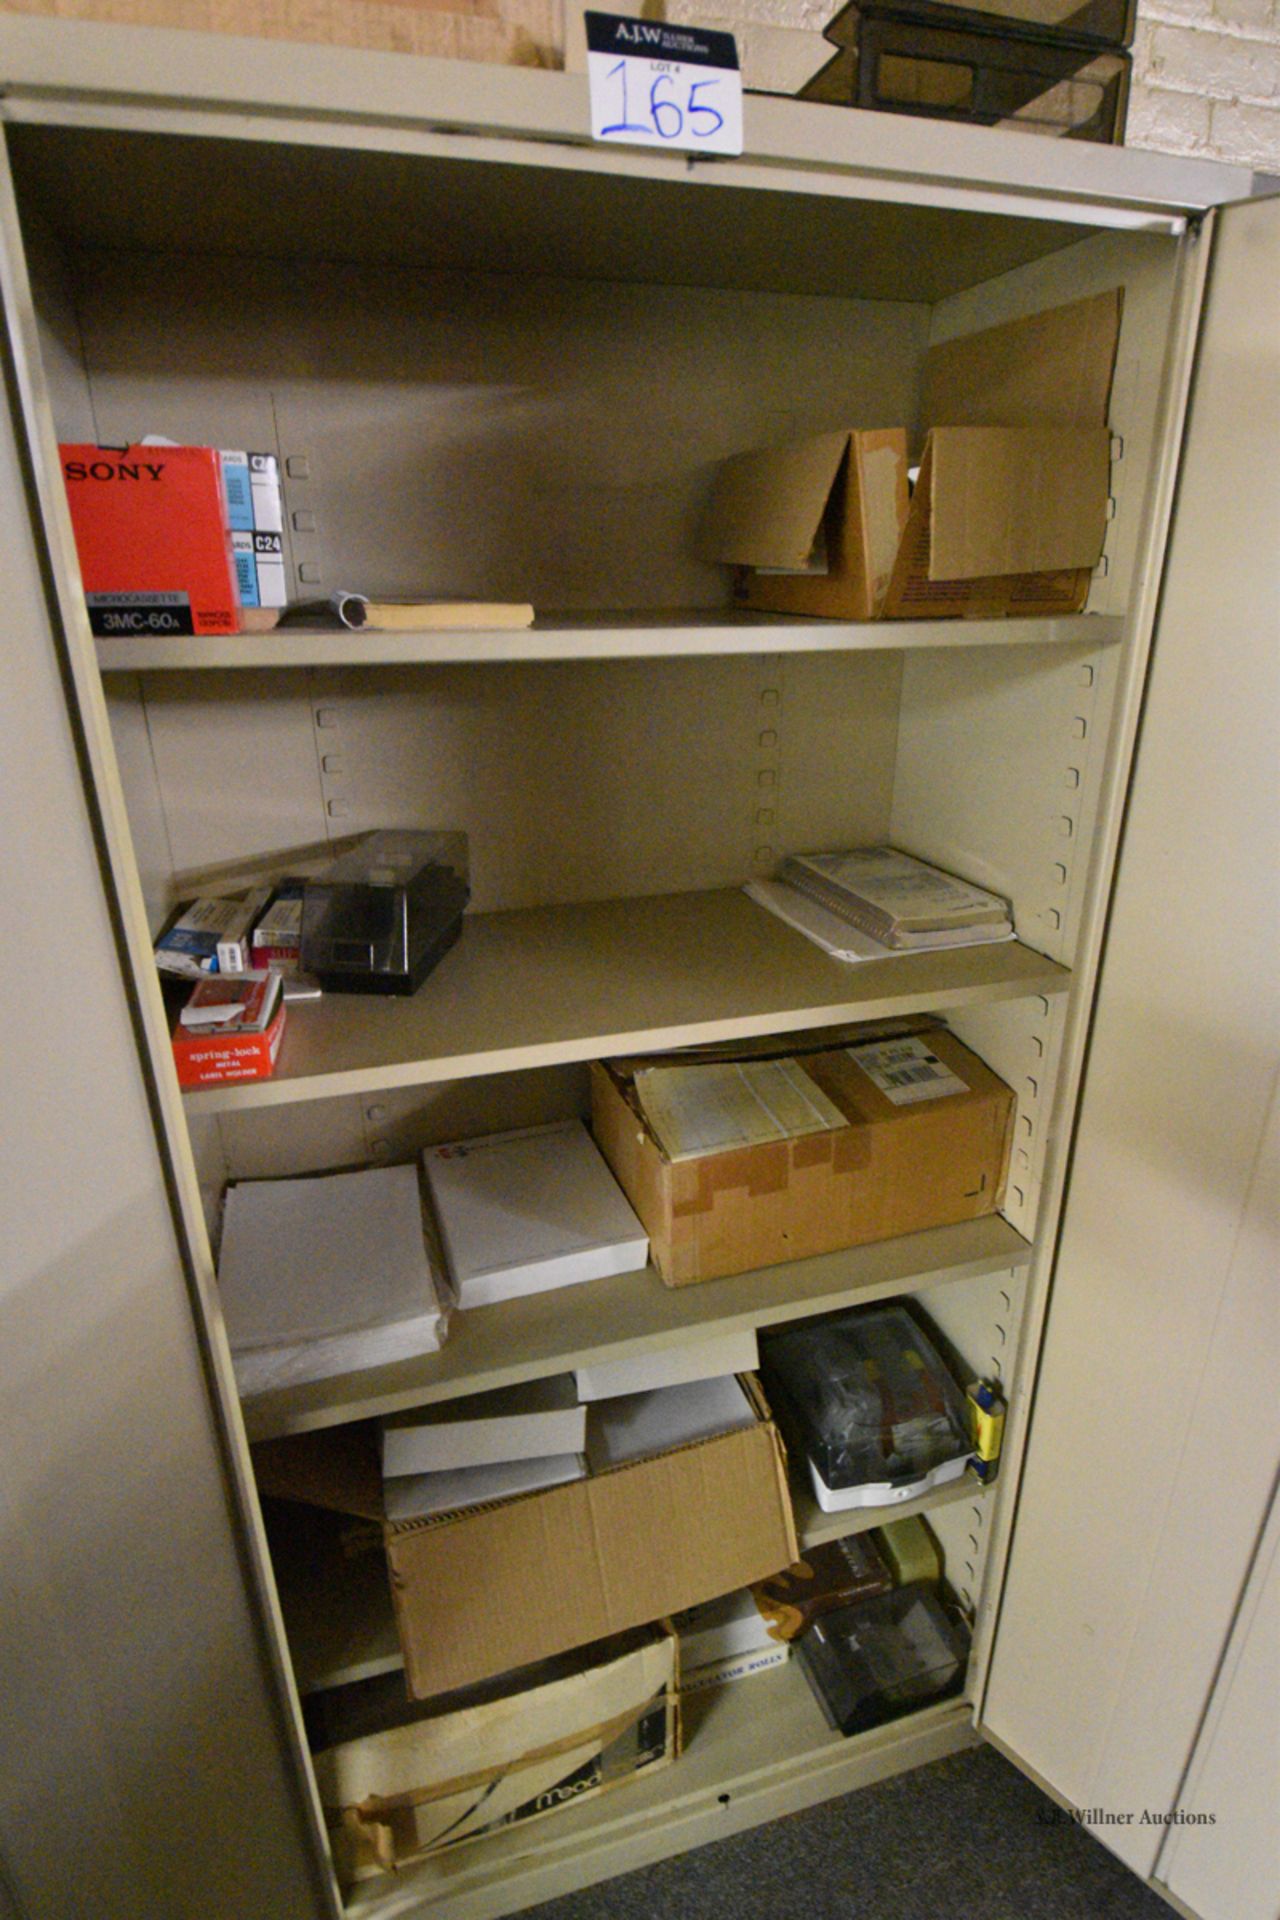 Cabinets - Image 2 of 5